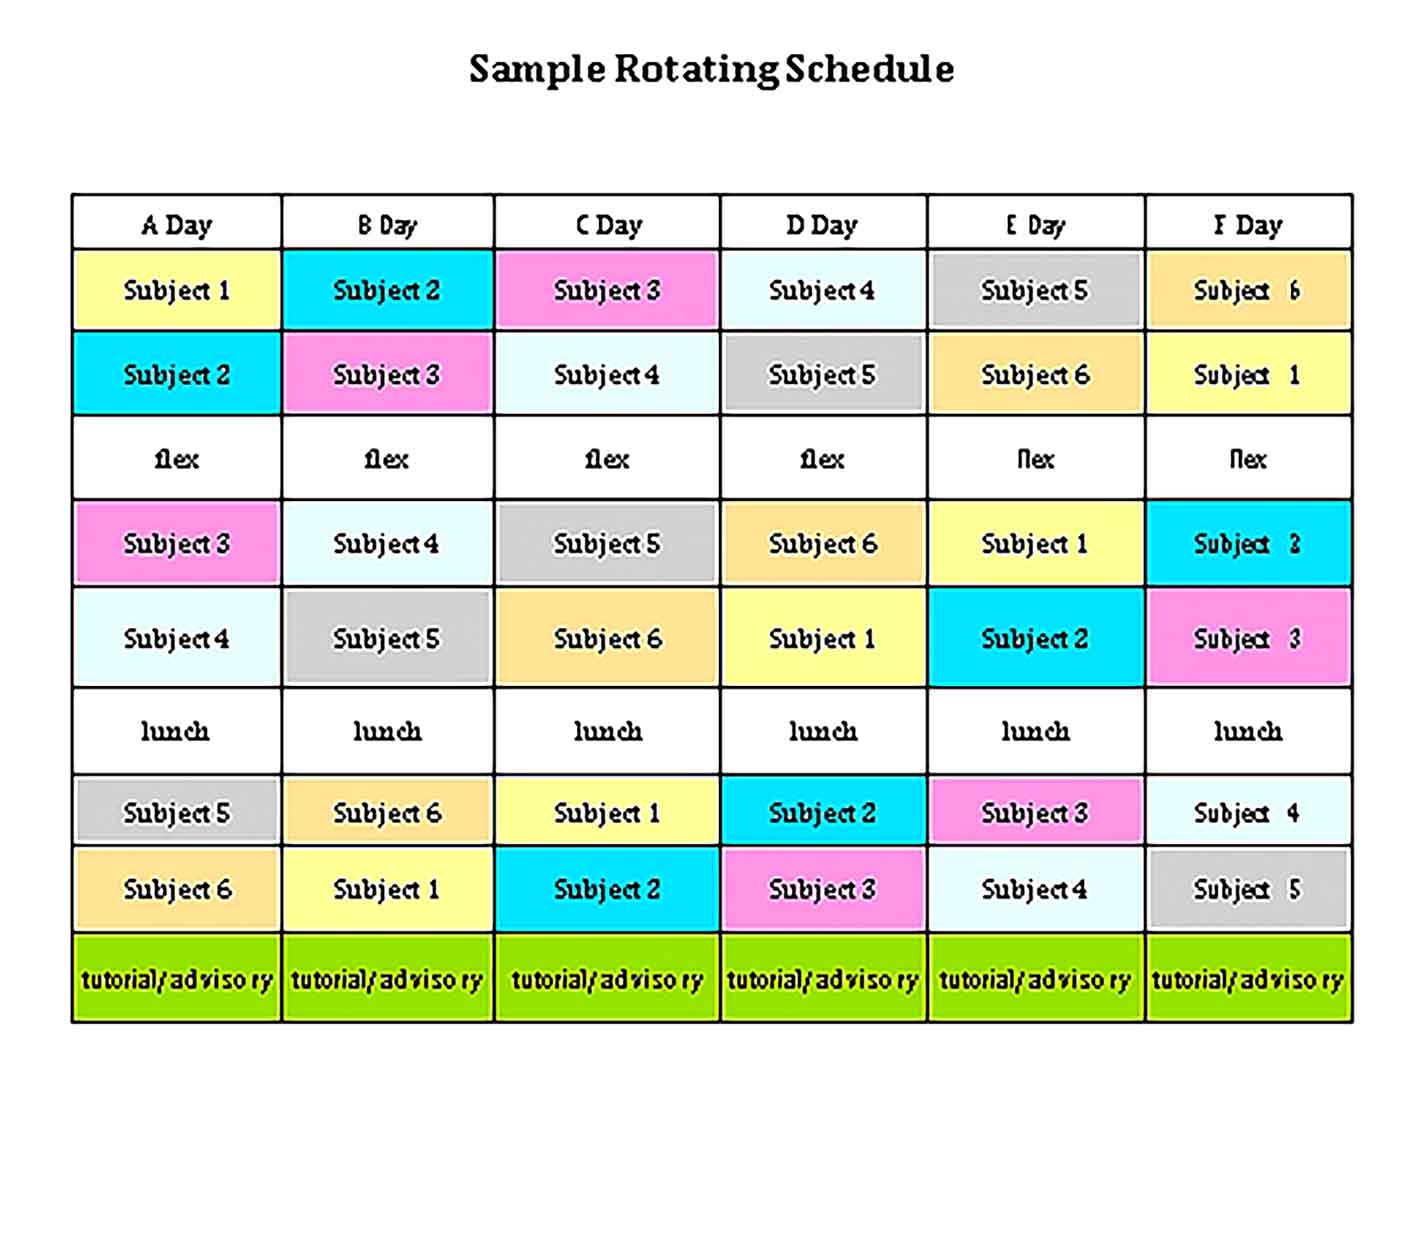 Template Rotating Schedule Sample 001